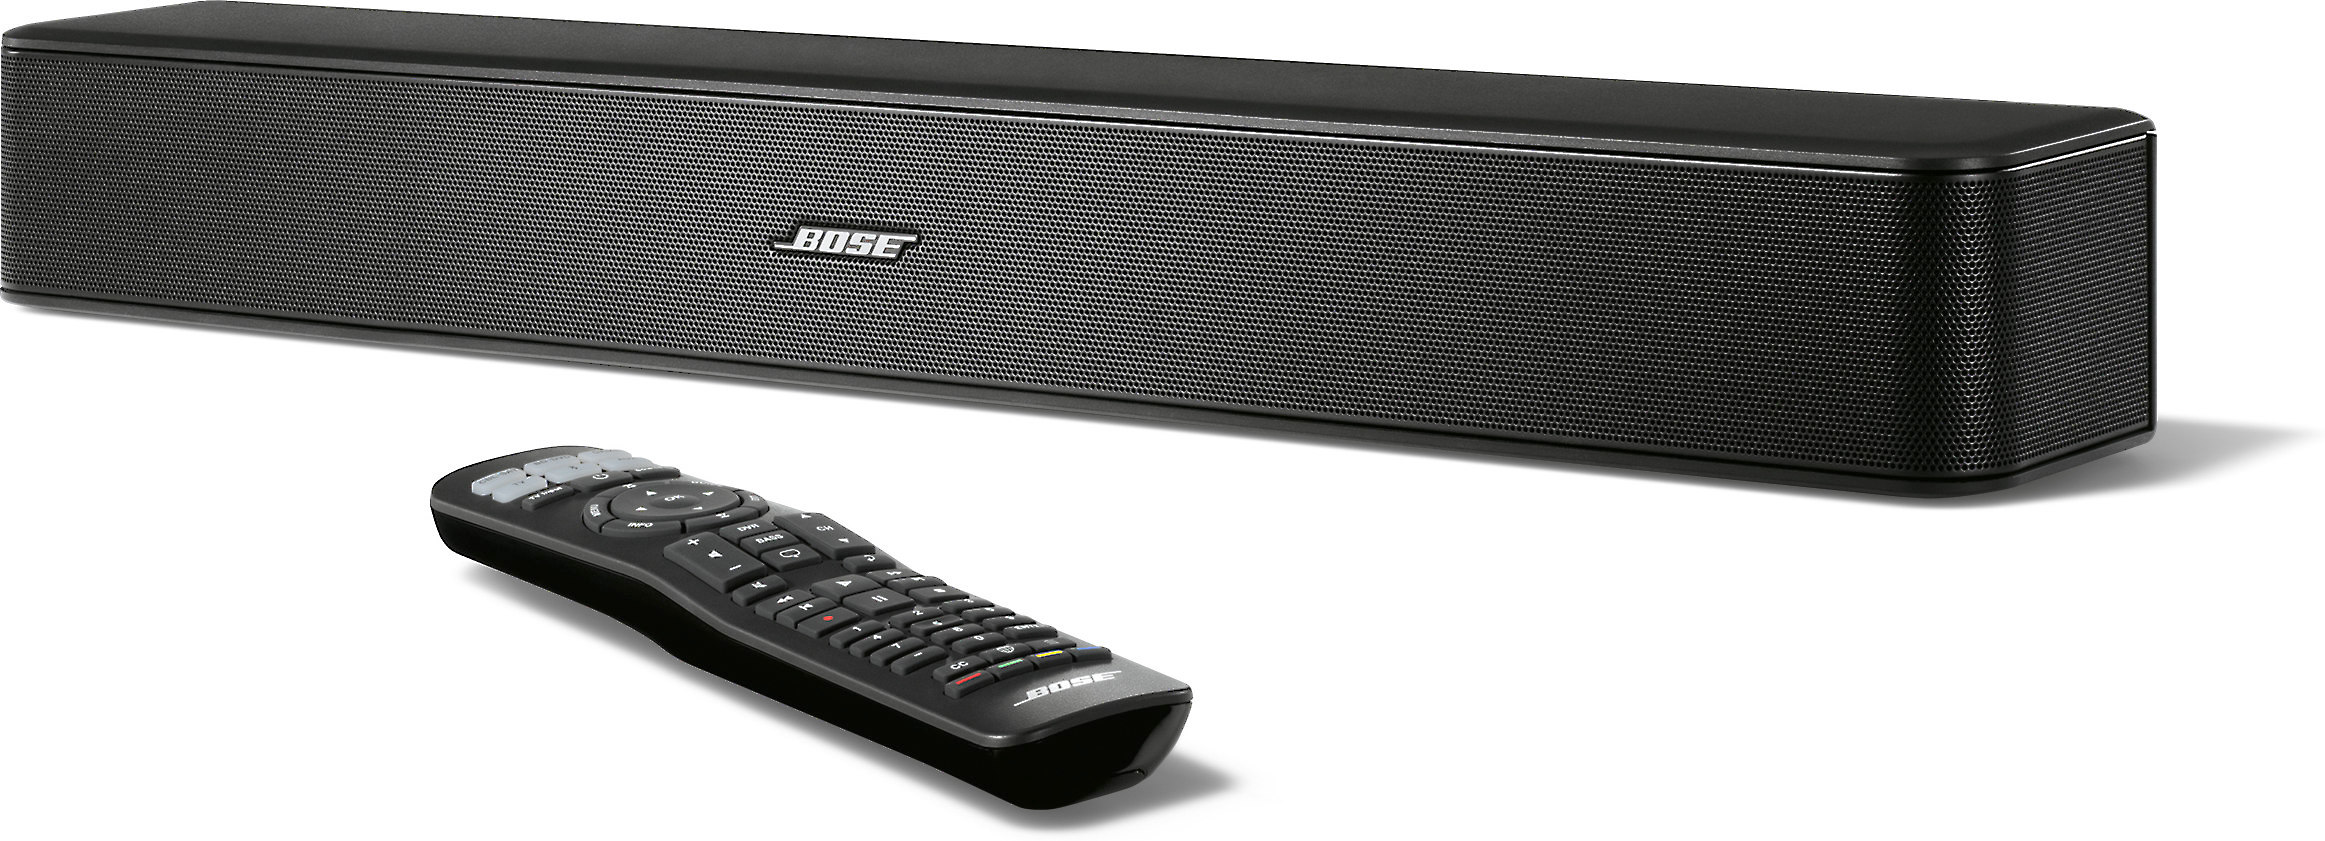 Customer Reviews: Bose® Solo 5 TV sound system at Crutchfield